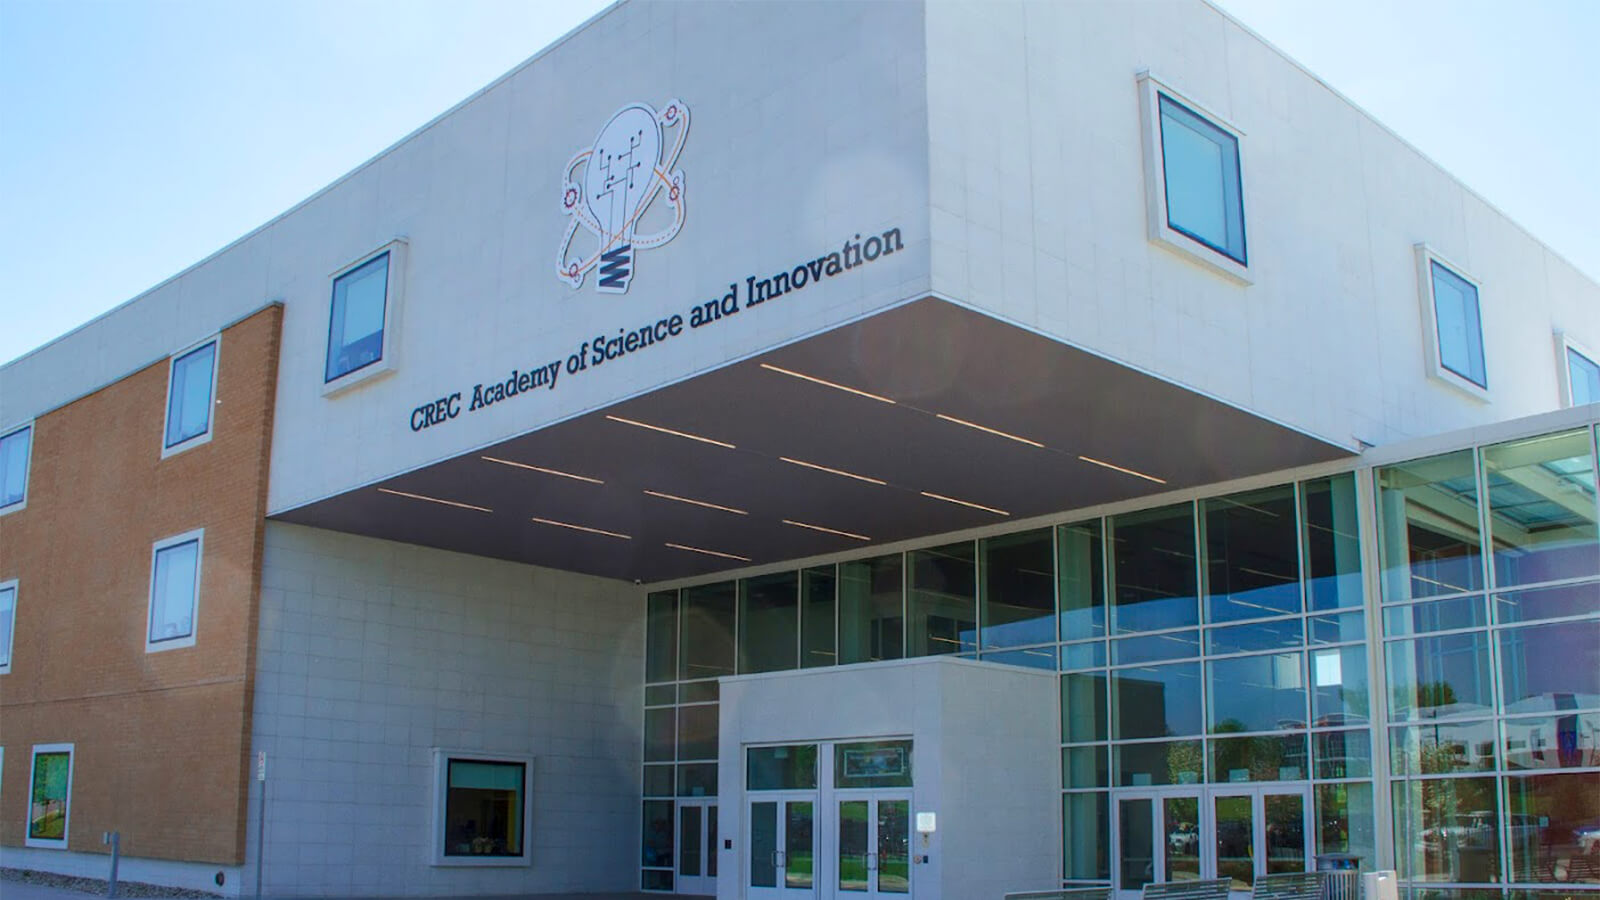 CREC Academy of Science and Innovation